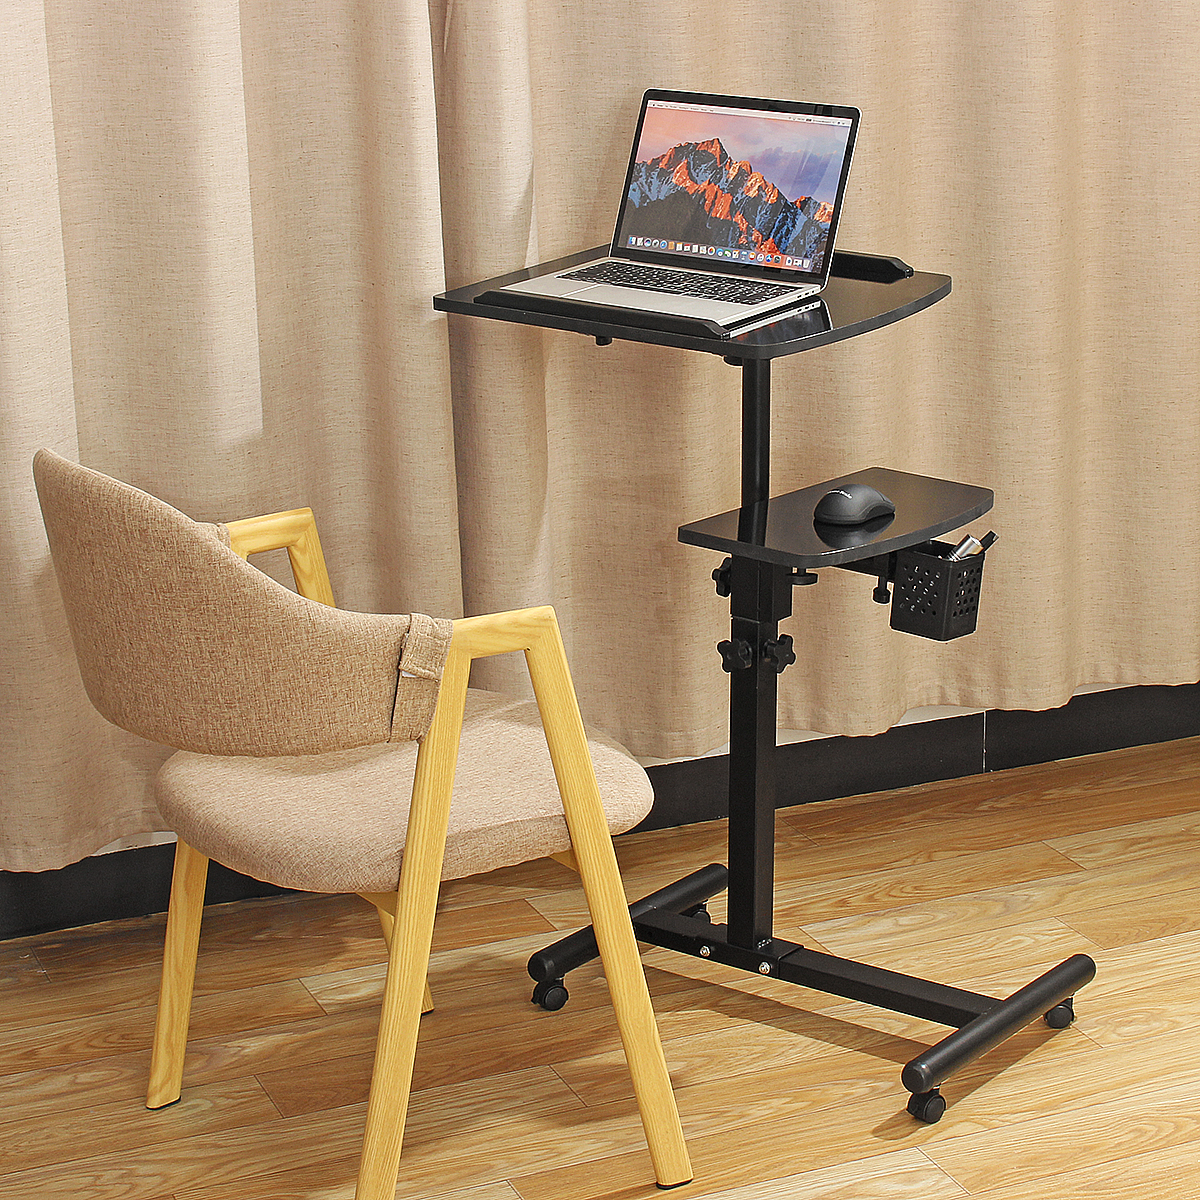 Double-lifting-360-degree-rotating-lazy-laptop-Stand-cooling-floor-removable-bedside-table-land-tabl-1630704-2